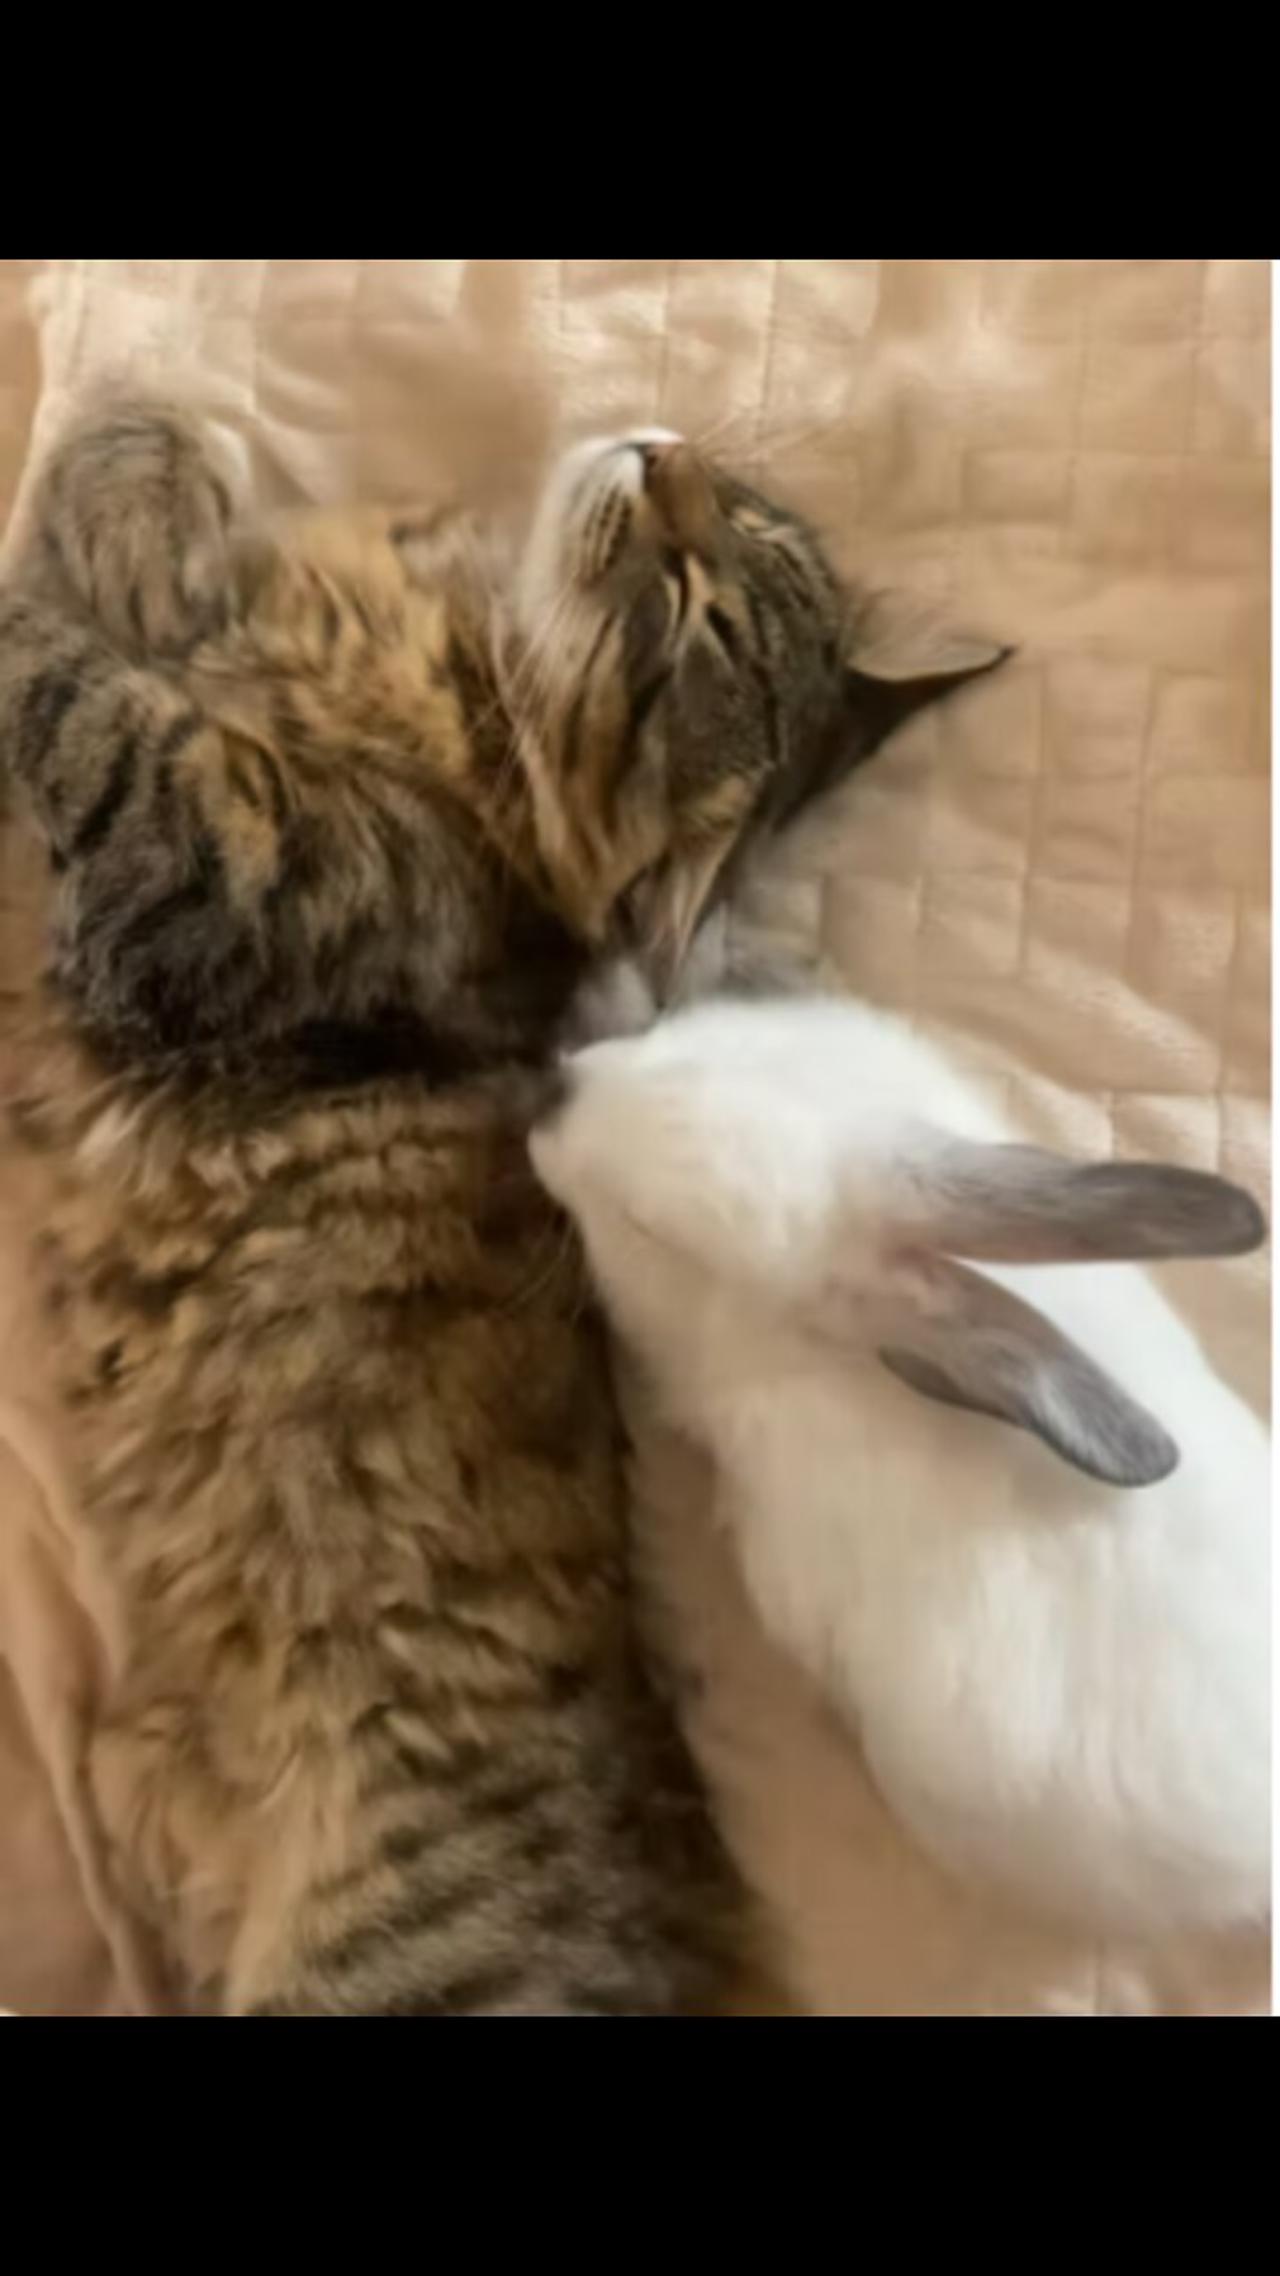 Cat and Rabbit slleping together unde the Blanket